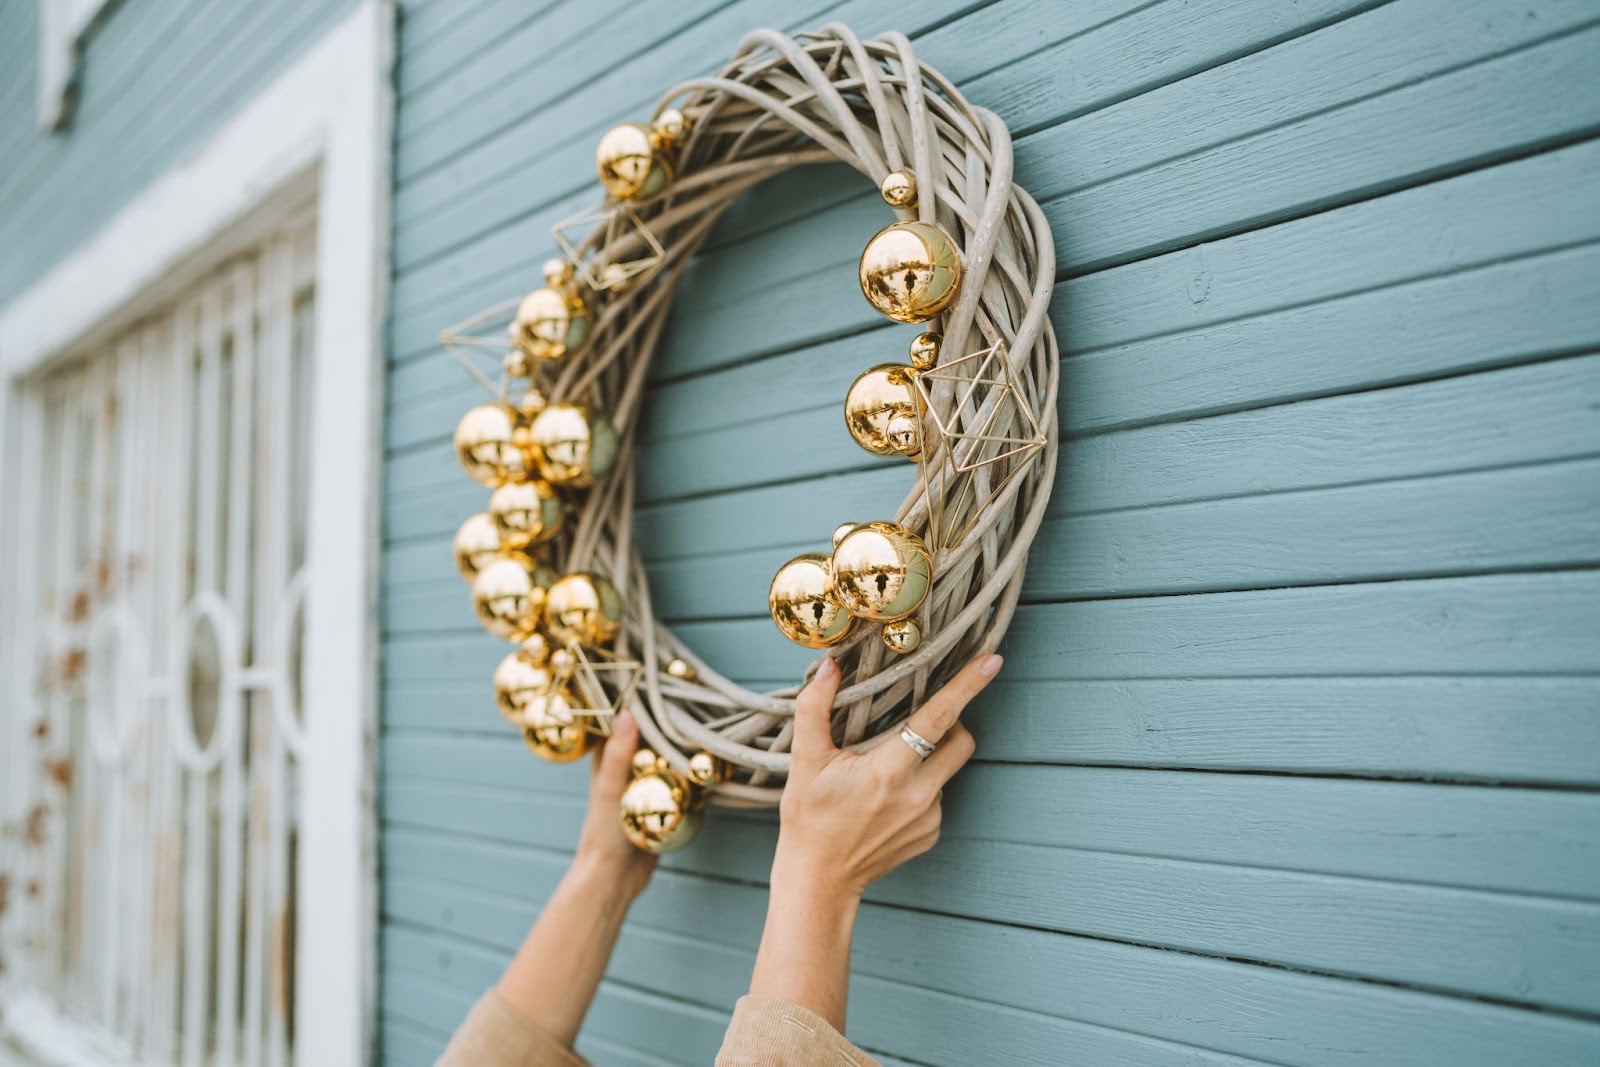 hanging a Christmas wreath